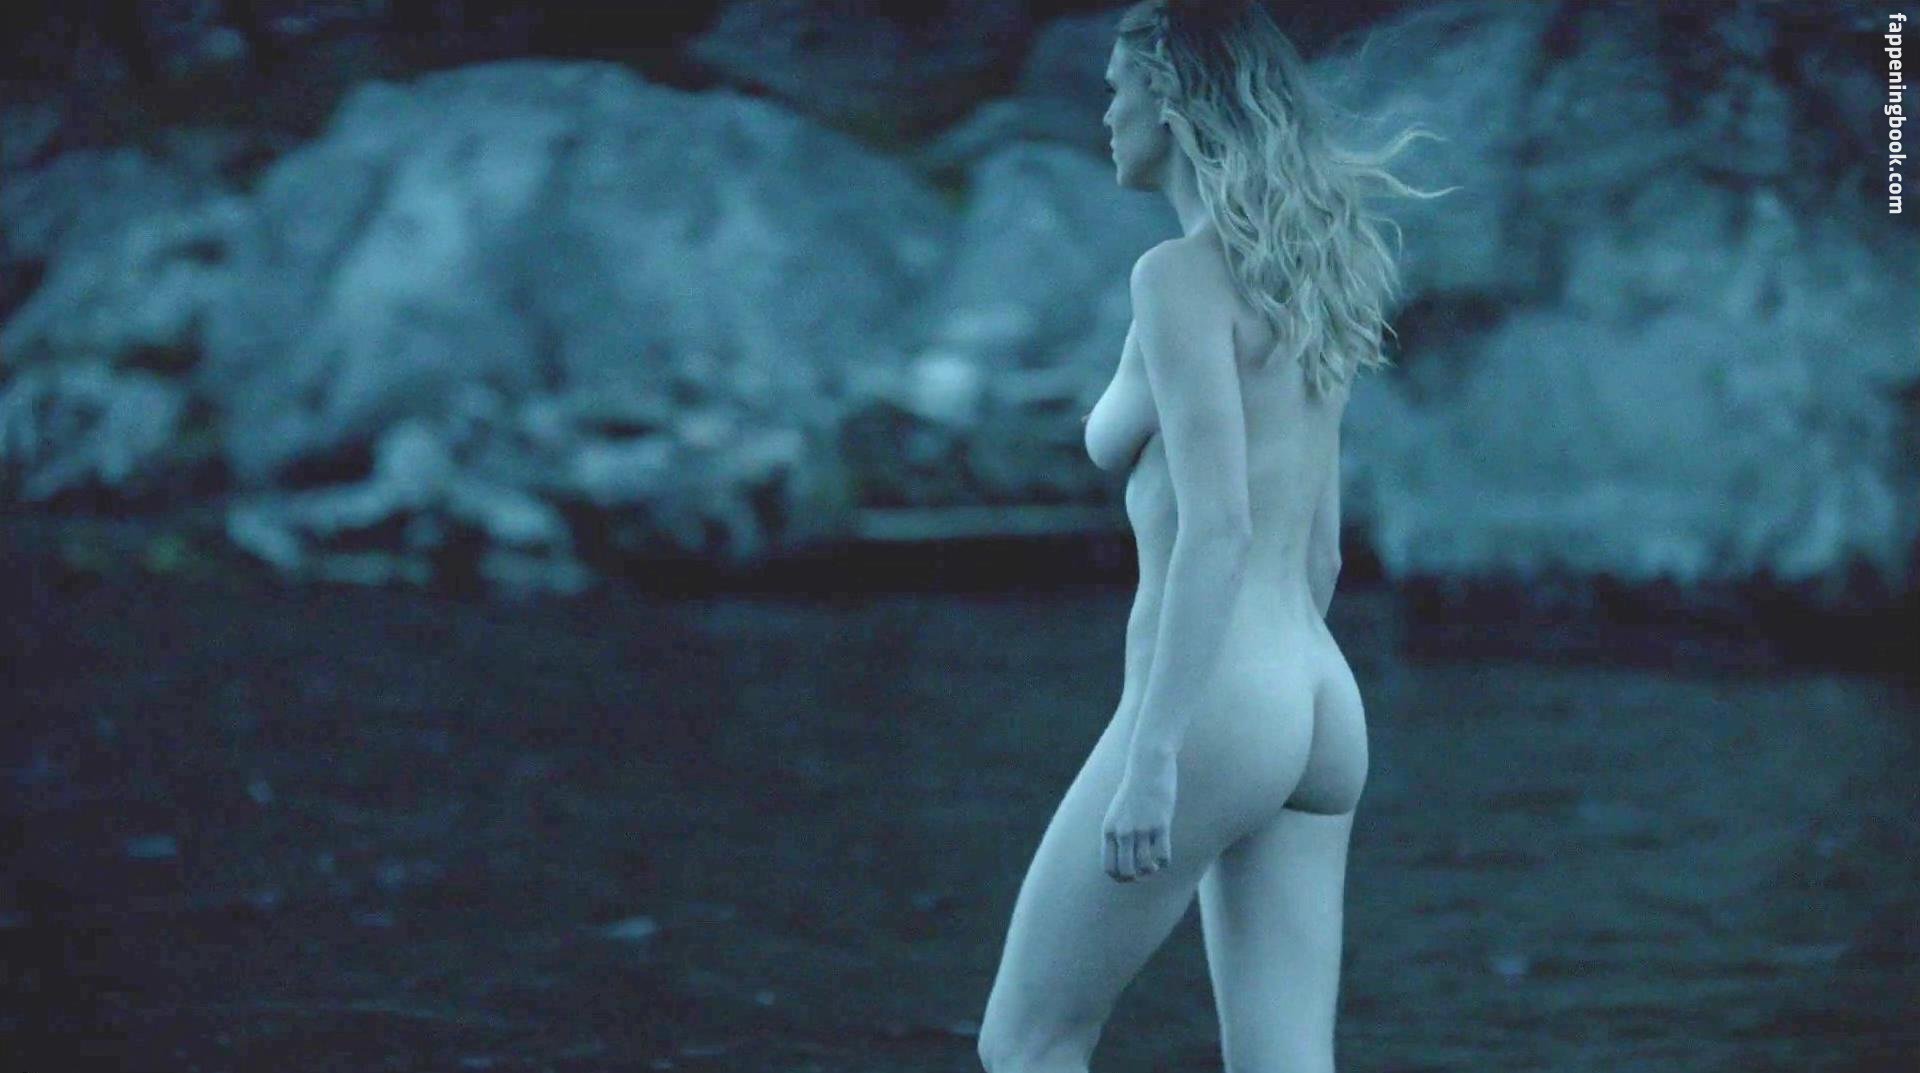 Gaia Weiss Nude, The Fappening - Photo #194682 - FappeningBook.